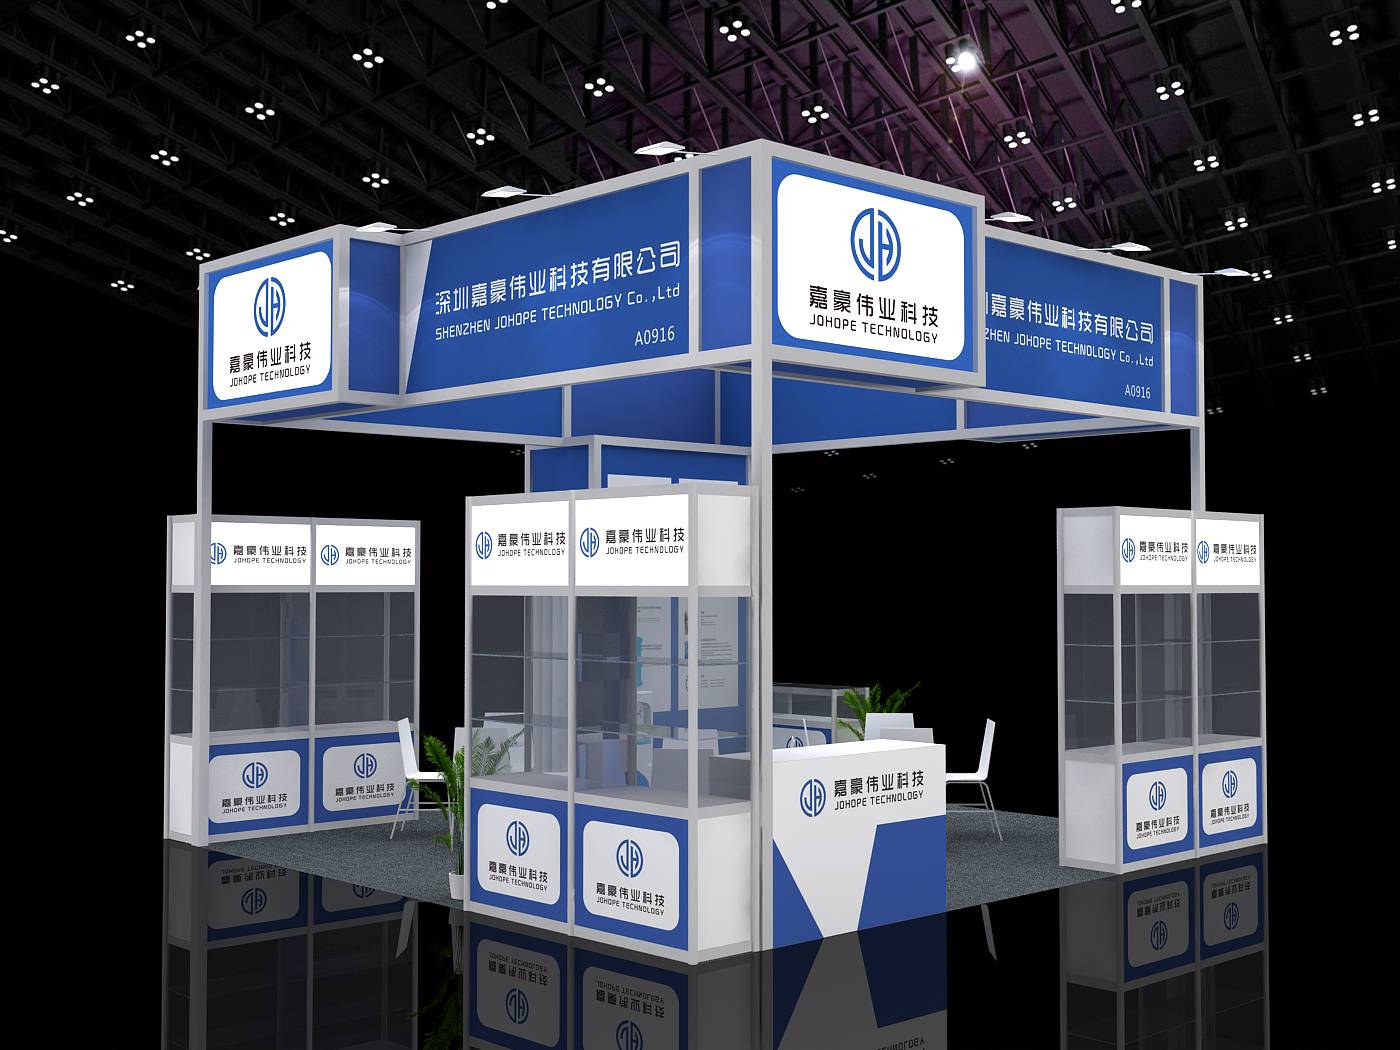 Shanghai APPPEXPO has been scheduled July 21-24,2020